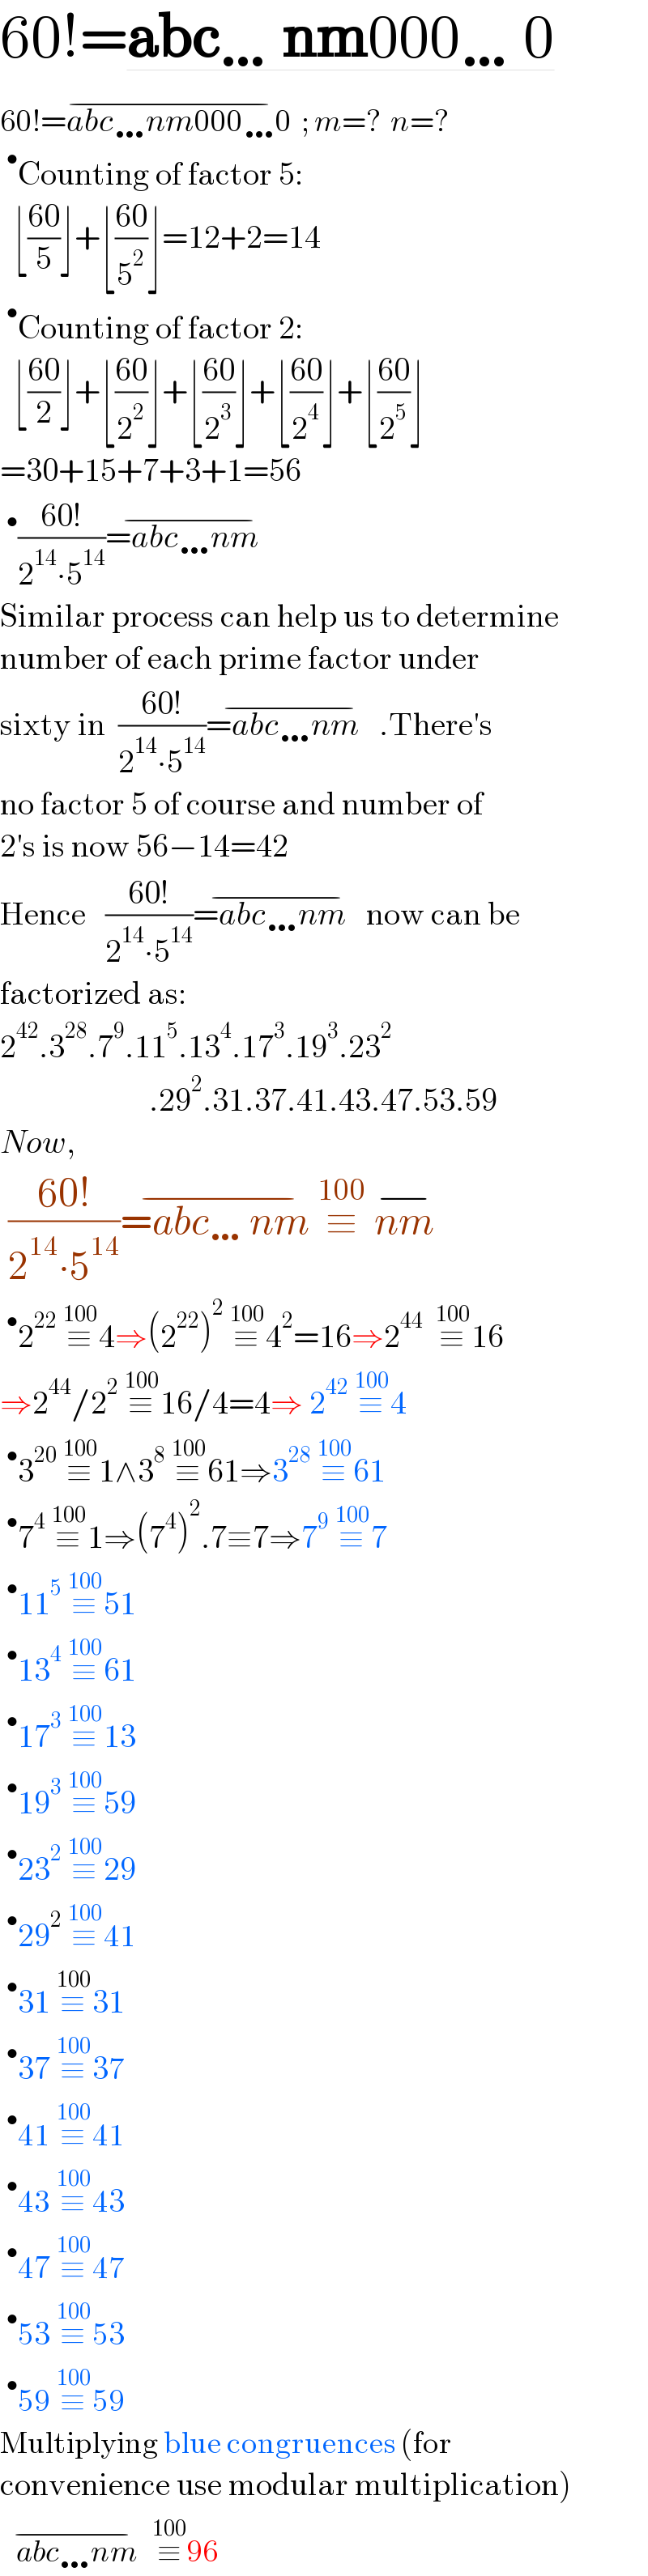 60!=abc…nm000…0  60!=abc…nm000…0  ;^(−)  m=?  n=?  ^• Counting of factor 5:    ⌊((60)/5)⌋+⌊((60)/5^2 )⌋=12+2=14  ^• Counting of factor 2:    ⌊((60)/2)⌋+⌊((60)/2^2 )⌋+⌊((60)/2^3 )⌋+⌊((60)/2^4 )⌋+⌊((60)/2^5 )⌋  =30+15+7+3+1=56  ^• ((60!)/(2^(14) ∙5^(14) ))=abc…nm   ^(−)   Similar process can help us to determine  number of each prime factor under  sixty in  ((60!)/(2^(14) ∙5^(14) ))=abc…nm   ^(−) .There′s  no factor 5 of course and number of  2′s is now 56−14=42  Hence   ((60!)/(2^(14) ∙5^(14) ))=abc…nm   ^(−) now can be  factorized as:  2^(42) .3^(28) .7^9 .11^5 .13^4 .17^3 .19^3 .23^2                          .29^2 .31.37.41.43.47.53.59  Now,    ((60!)/(2^(14) ∙5^(14) ))=abc…nm ^(−) ≡^(100)   nm^(−)   ^• 2^(22)  ≡^(100)  4⇒(2^(22) )^2  ≡^(100)  4^2 =16⇒2^(44)   ≡^(100)  16    ⇒2^(44) /2^2  ≡^(100)  16/4=4⇒ 2^(42)  ≡^(100)  4  ^• 3^(20)  ≡^(100)  1∧3^8  ≡^(100)  61⇒3^(28)  ≡^(100)  61  ^• 7^4  ≡^(100)  1⇒(7^4 )^2 .7≡7⇒7^9  ≡^(100)  7  ^• 11^5  ≡^(100)  51  ^• 13^4  ≡^(100)  61  ^• 17^3  ≡^(100)  13  ^• 19^3  ≡^(100)  59  ^• 23^2  ≡^(100)  29  ^• 29^2  ≡^(100)  41  ^• 31 ≡^(100)  31  ^• 37 ≡^(100)  37  ^• 41 ≡^(100)  41  ^• 43 ≡^(100)  43  ^• 47 ≡^(100)  47  ^• 53 ≡^(100)  53  ^• 59 ≡^(100)  59  Multiplying blue congruences (for  convenience use modular multiplication)     abc…nm   ^(−) ≡^(100)  96  